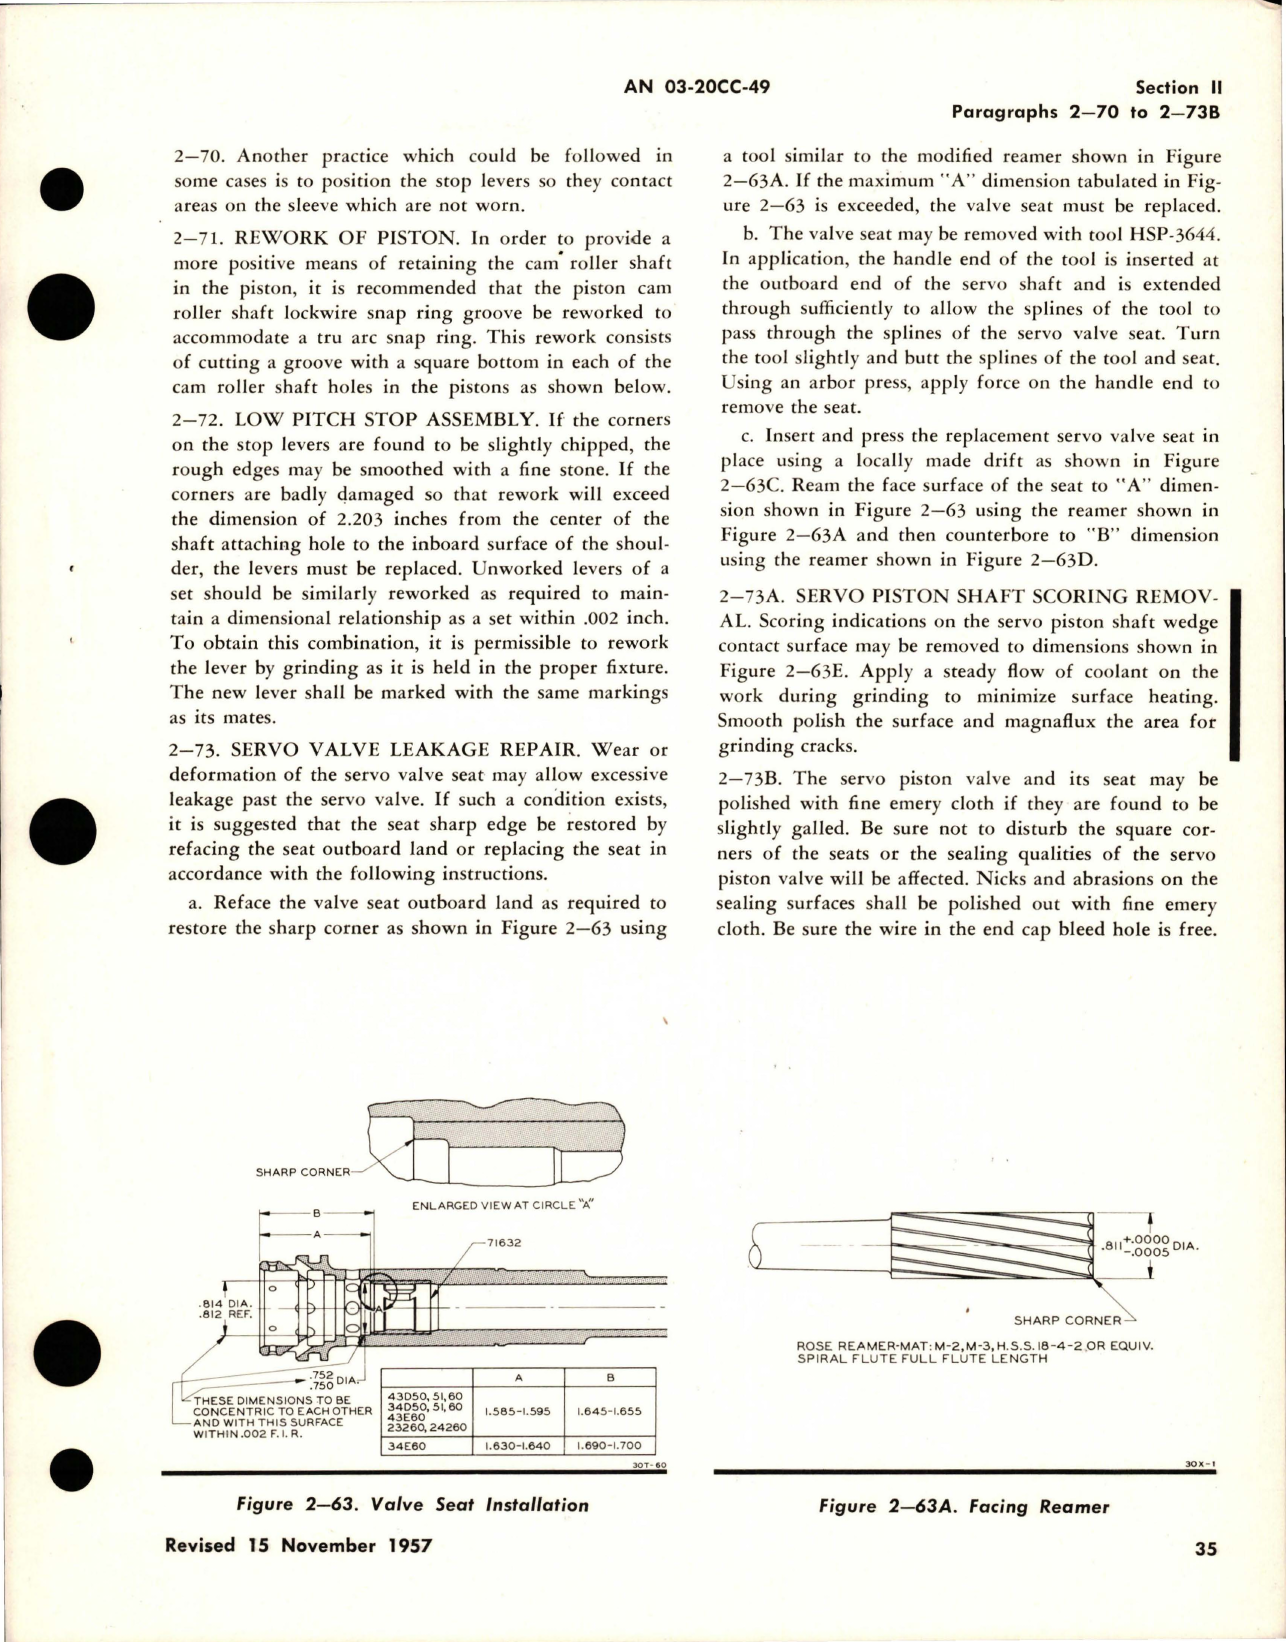 Sample page 5 from AirCorps Library document: Overhaul Instructions for Hydromatic Propeller and Bracket Assemblies